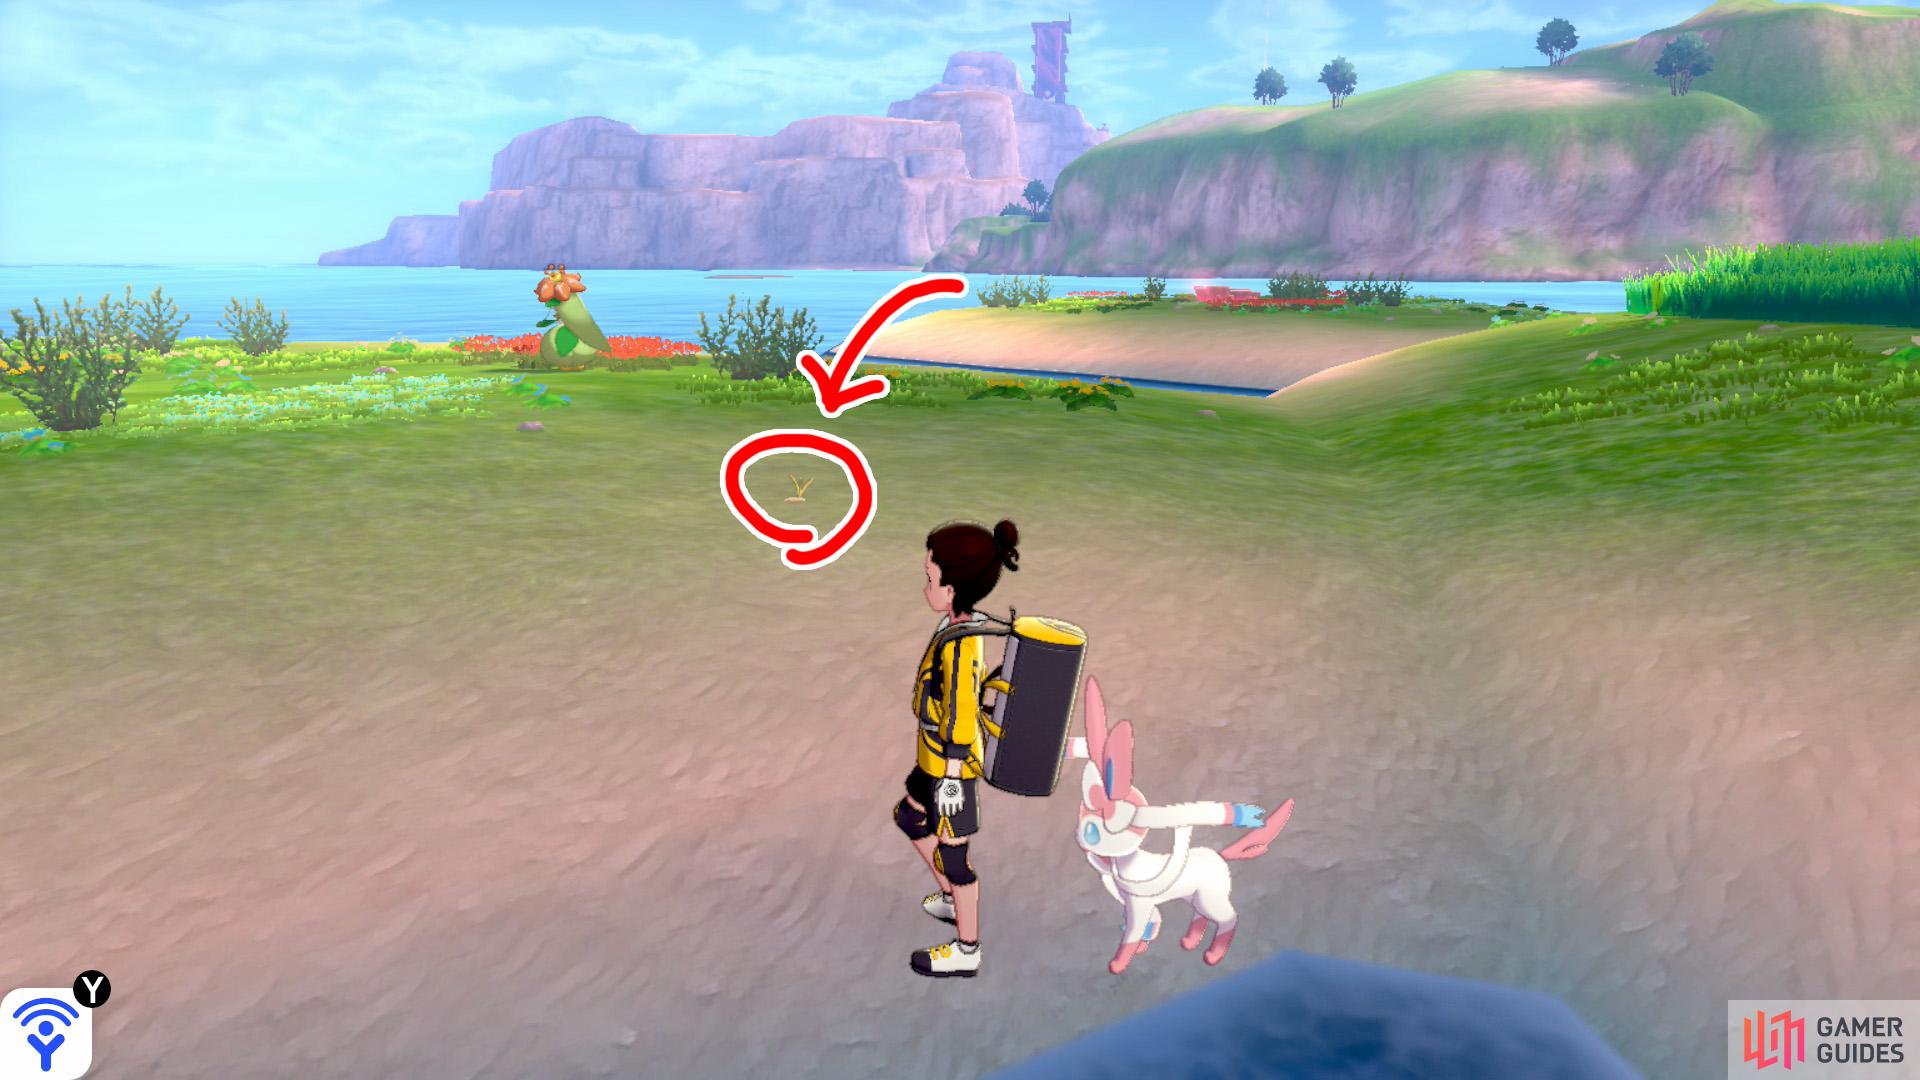 6/11: From Diglett 5, move onto the fifth "petal". The first one here is located in the middle of the sand, close to the island's centre.